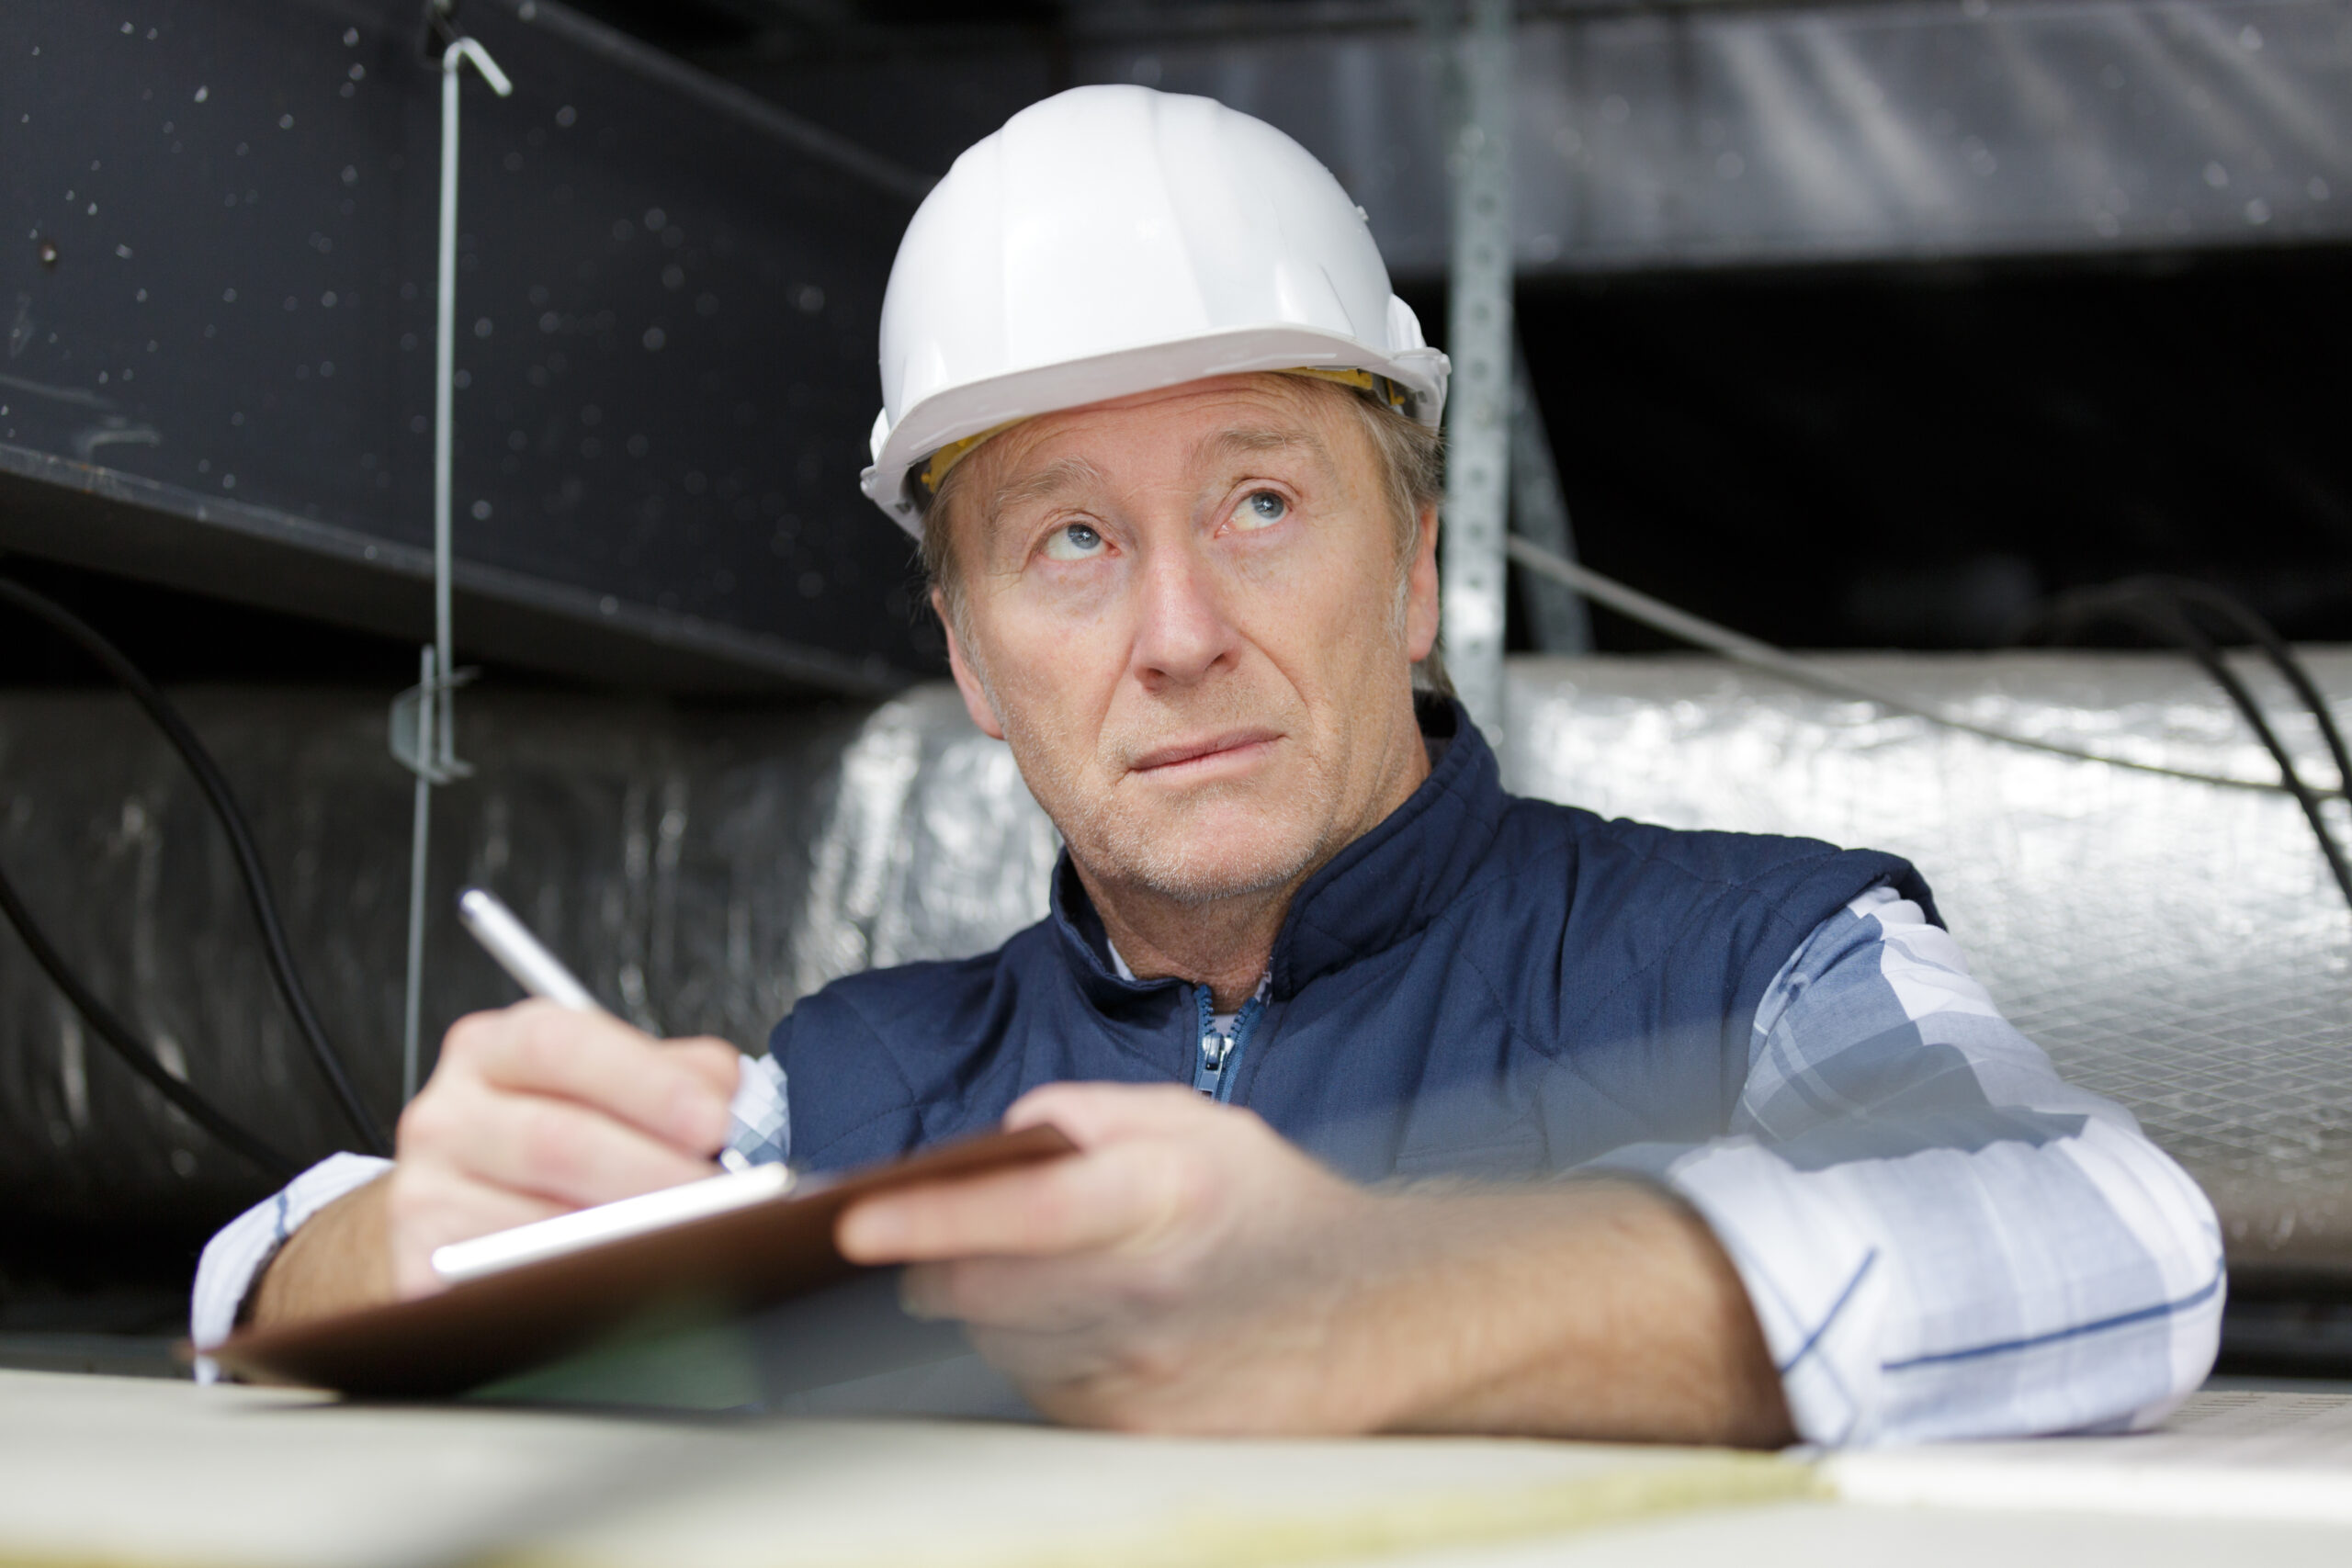 A white/Caucasian man wearing a white hard hat holds a clipboard and a pen during a roof inspection